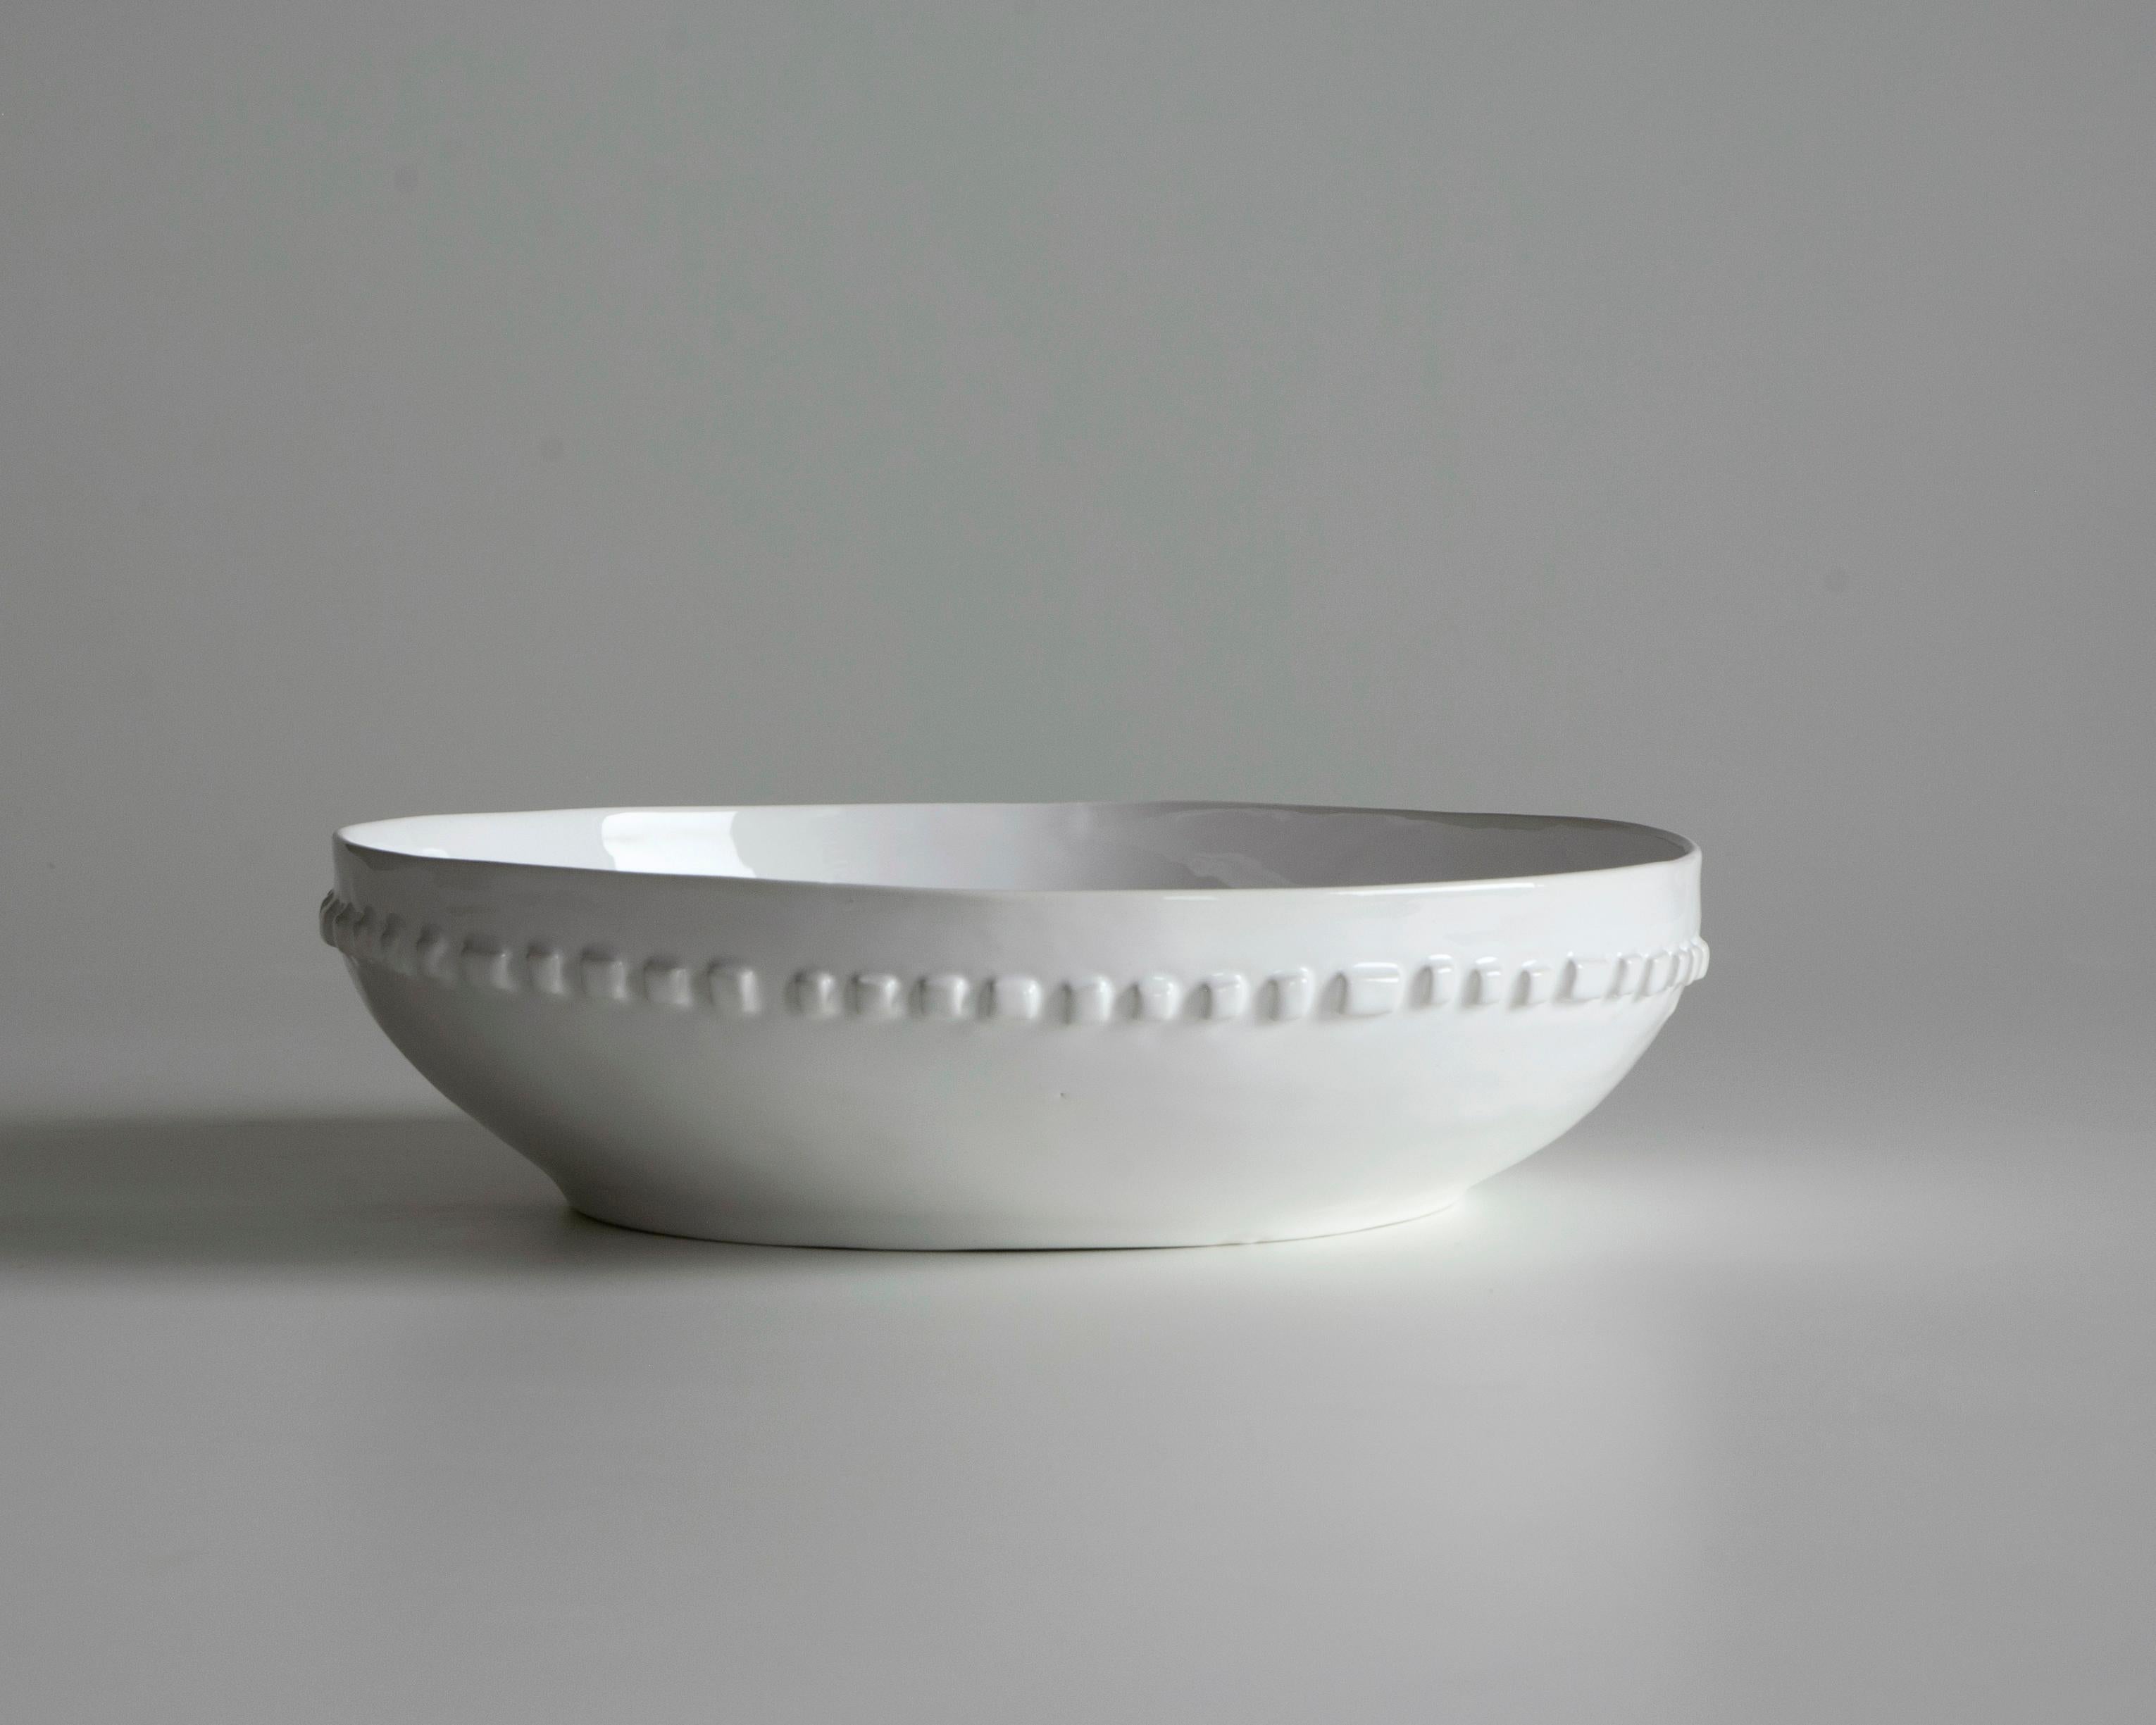 The white ceramic bowl has a relief decoration. Each small piece is made by hand, giving each a unique character. The enameling applied using the dipping technique, with its subtle imperfections, gives the piece a distinctive and authentic appeal.